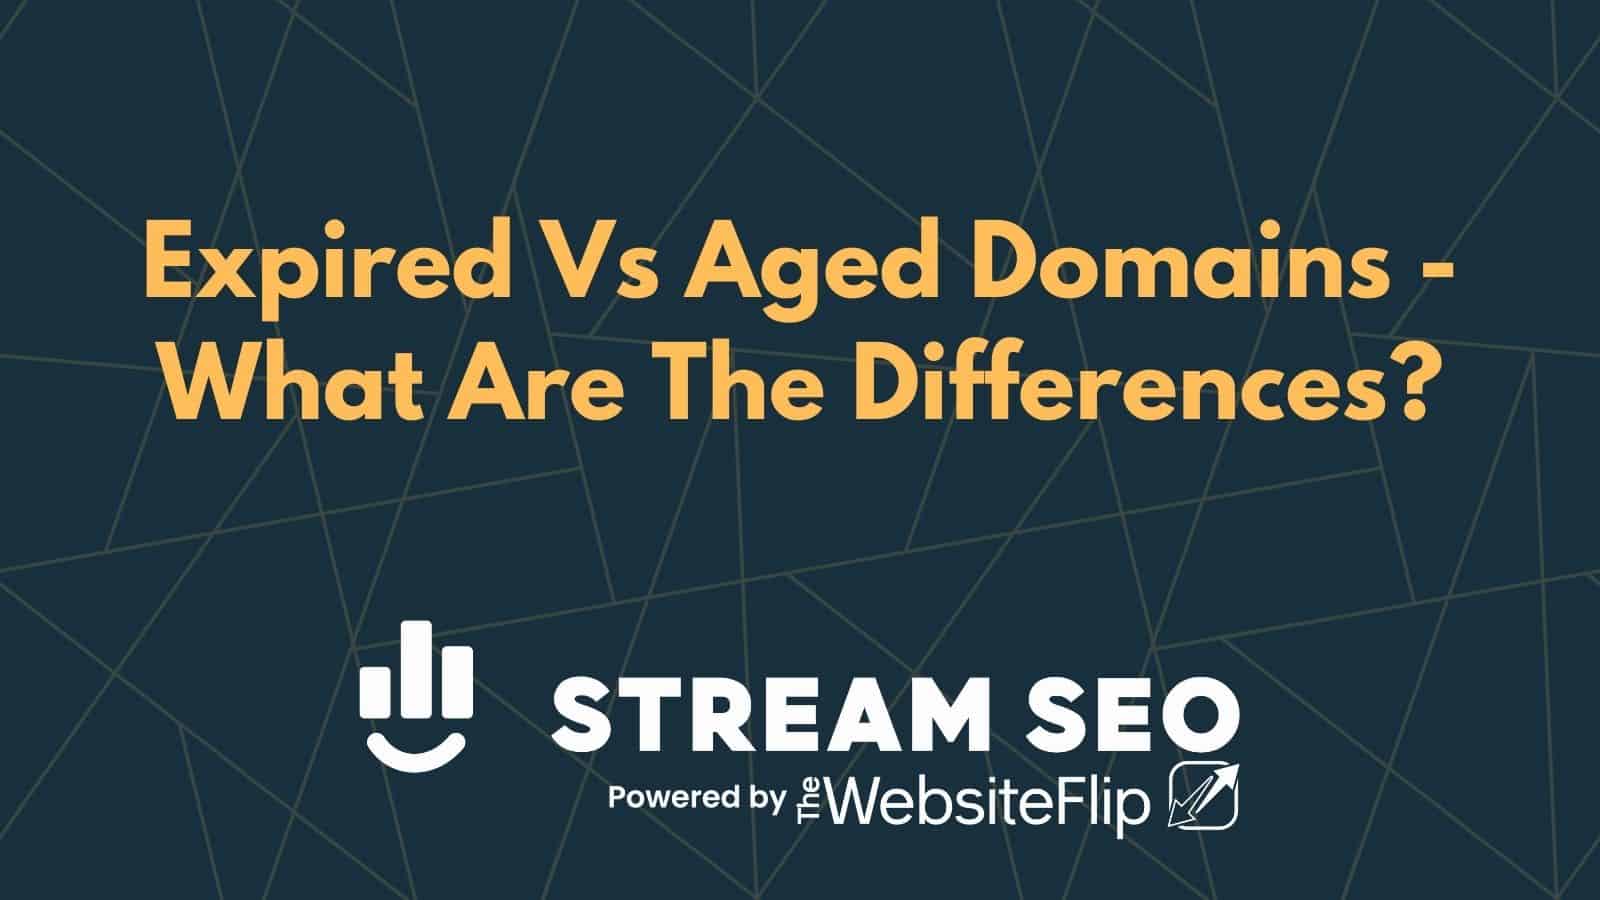 Expired vs Aged Domains